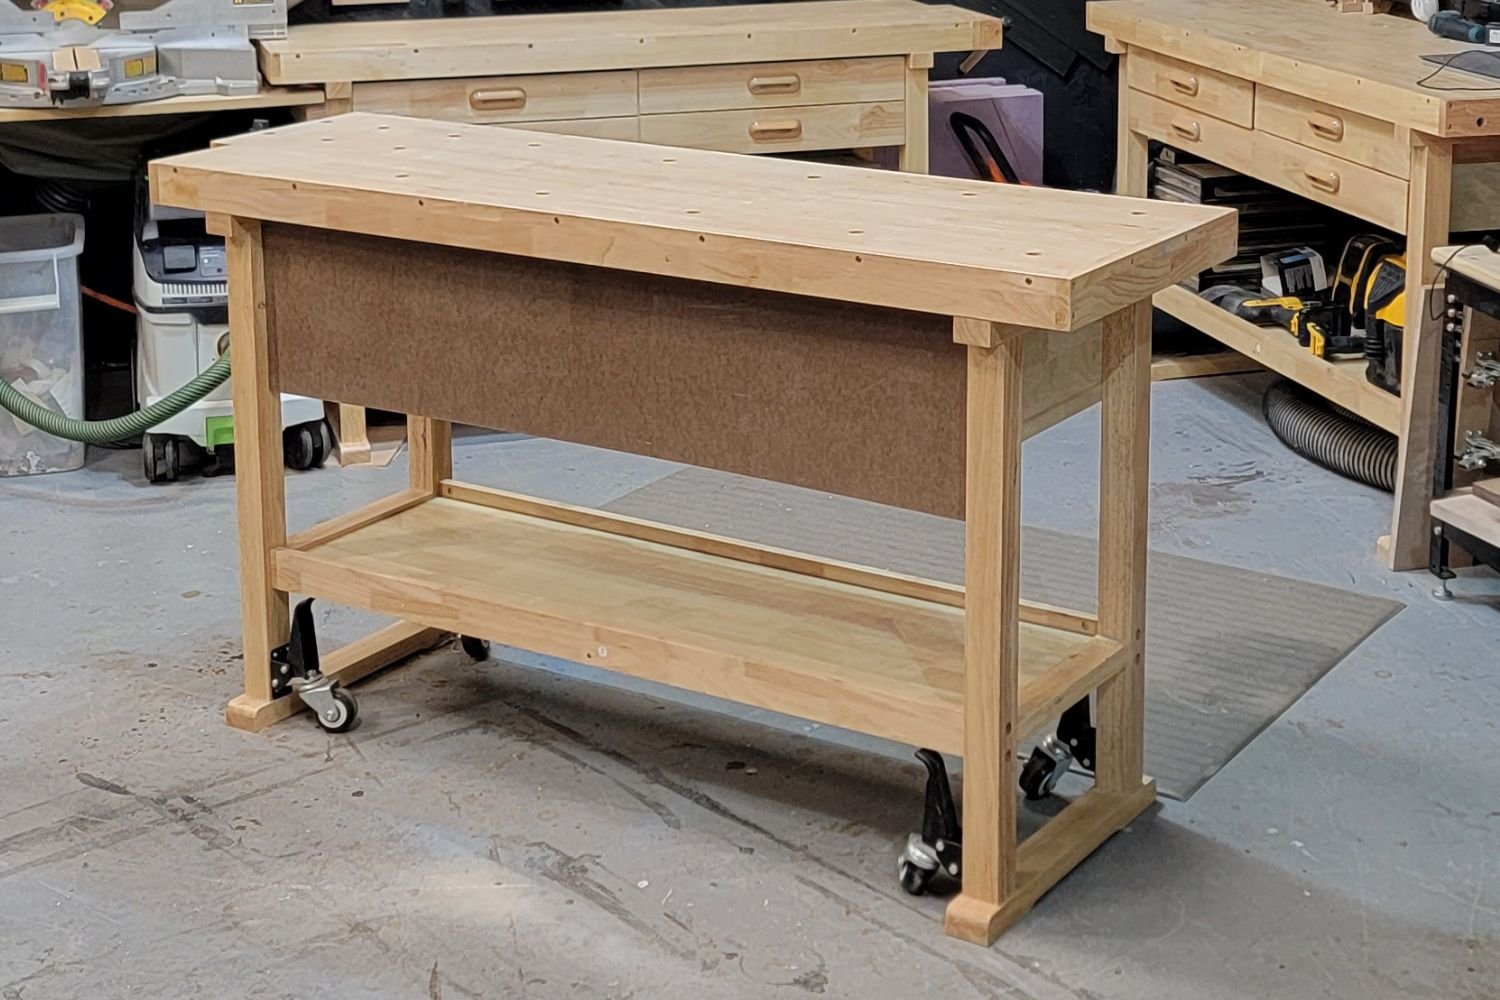 how heavy should a woodworking bench be? 2